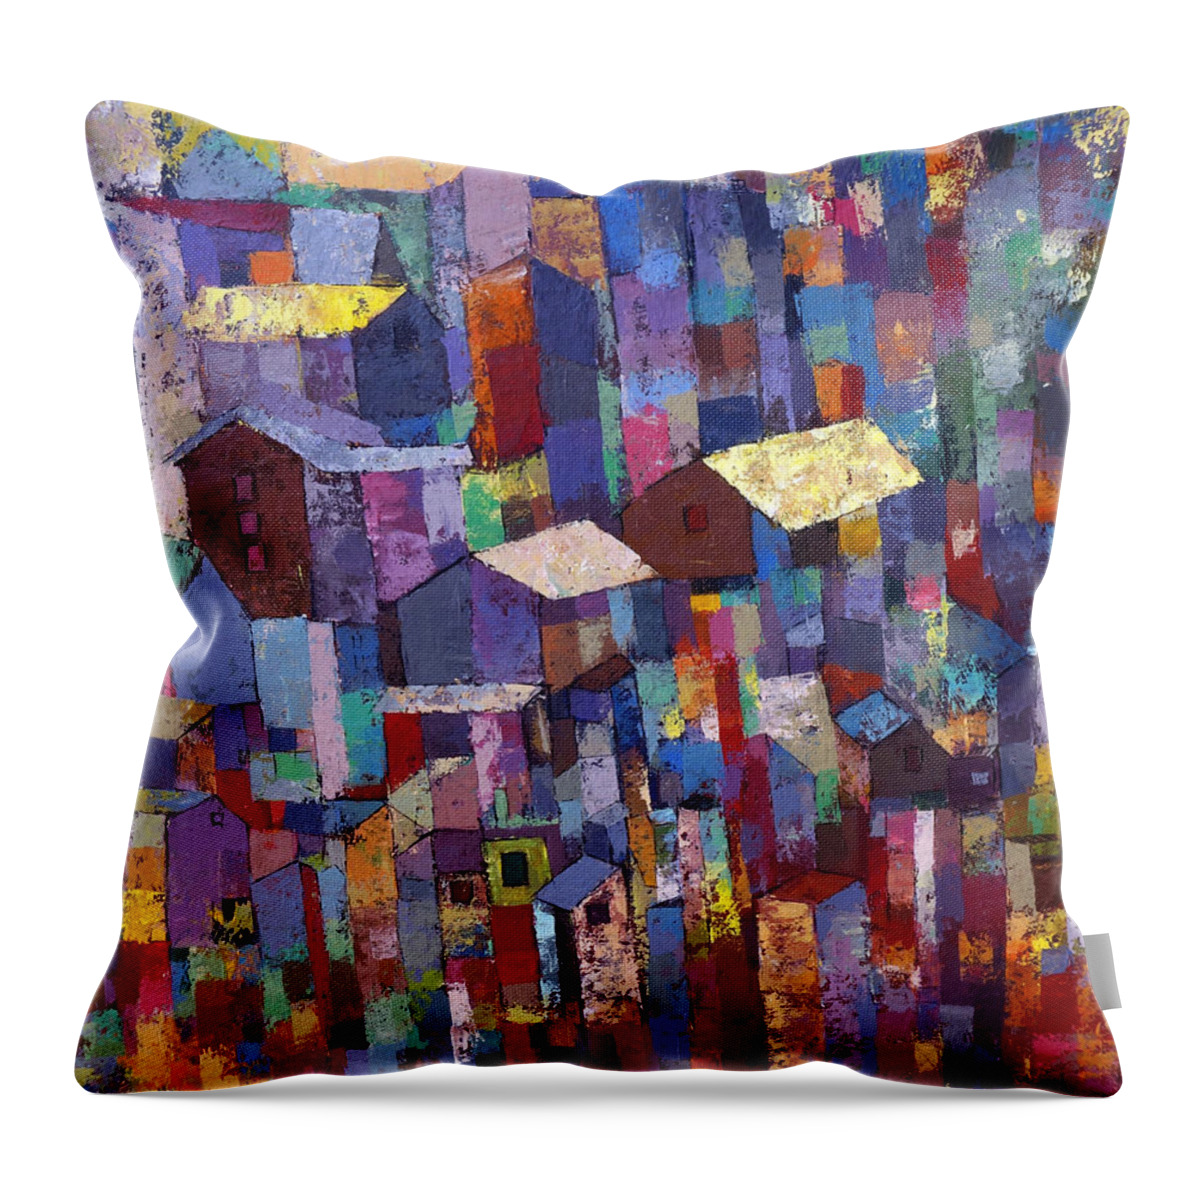 African Painters Throw Pillow featuring the painting City Scape 1 by Ronex Ahimbisibwe